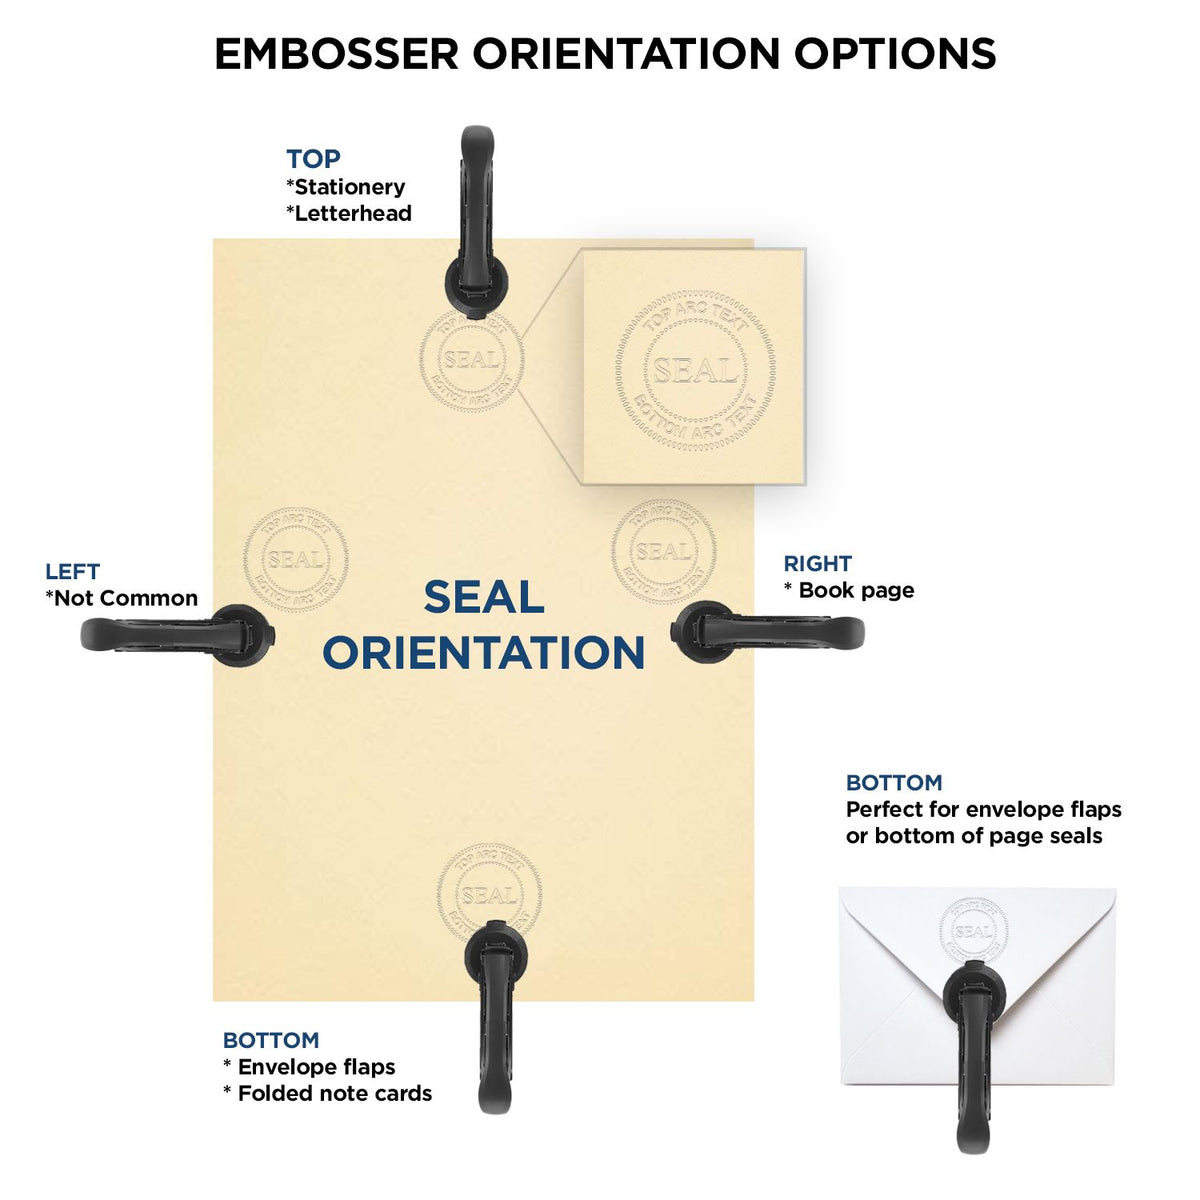 An infographic for the Heavy Duty Cast Iron West Virginia Engineer Seal Embosser showing embosser orientation, this is showing examples of a top, bottom, right and left insert.